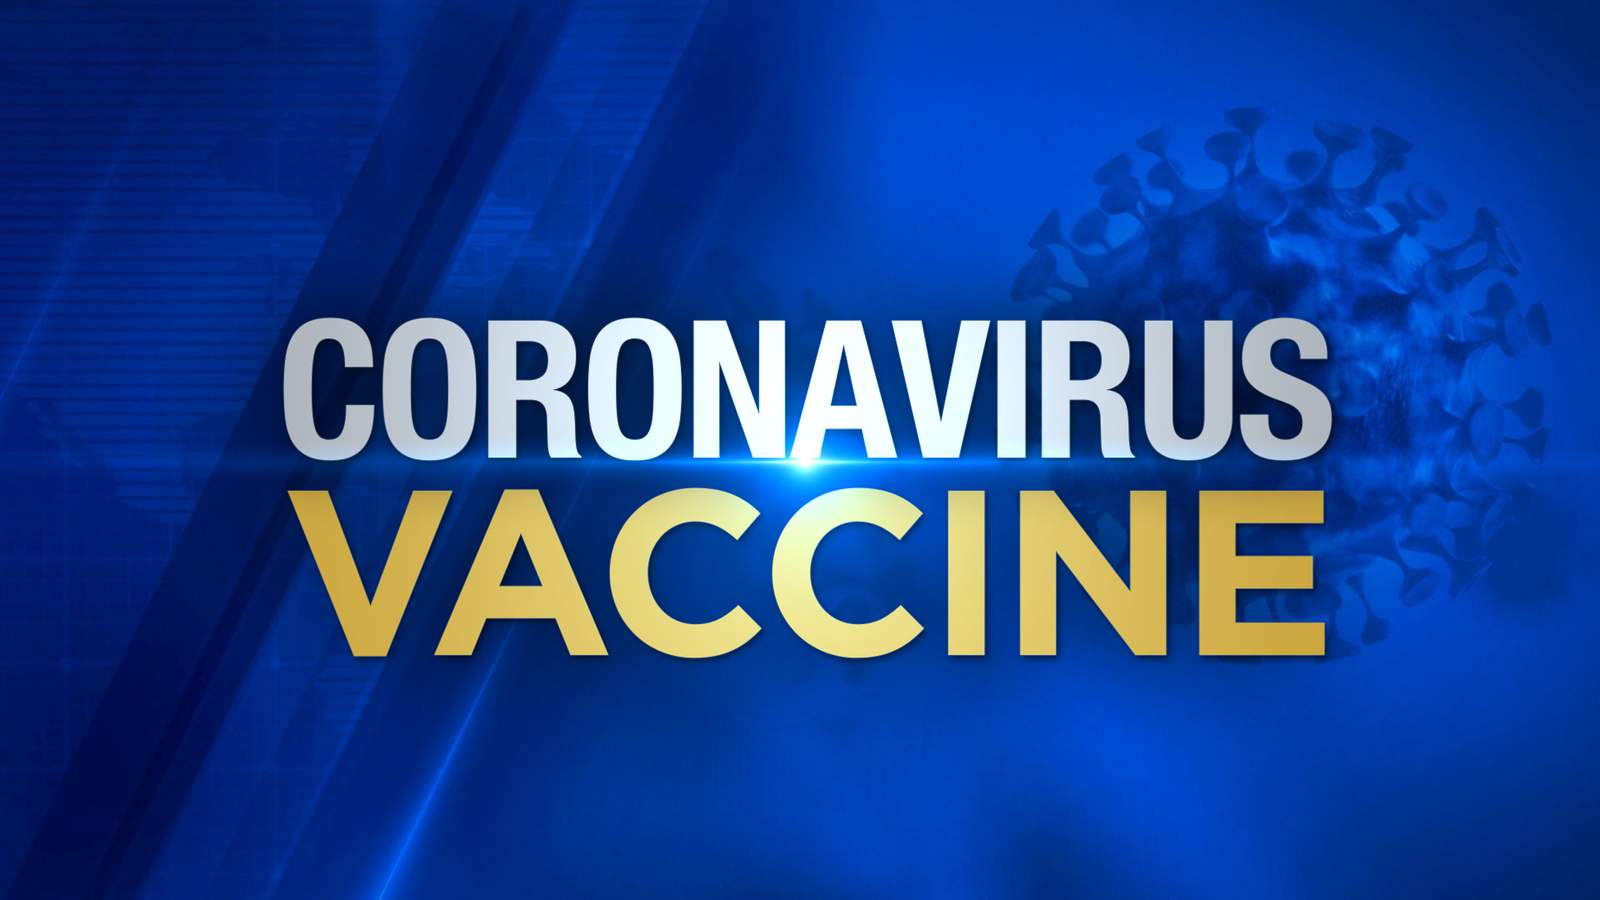 Virtual COVID-19 vaccine panel discussion to be held tonight